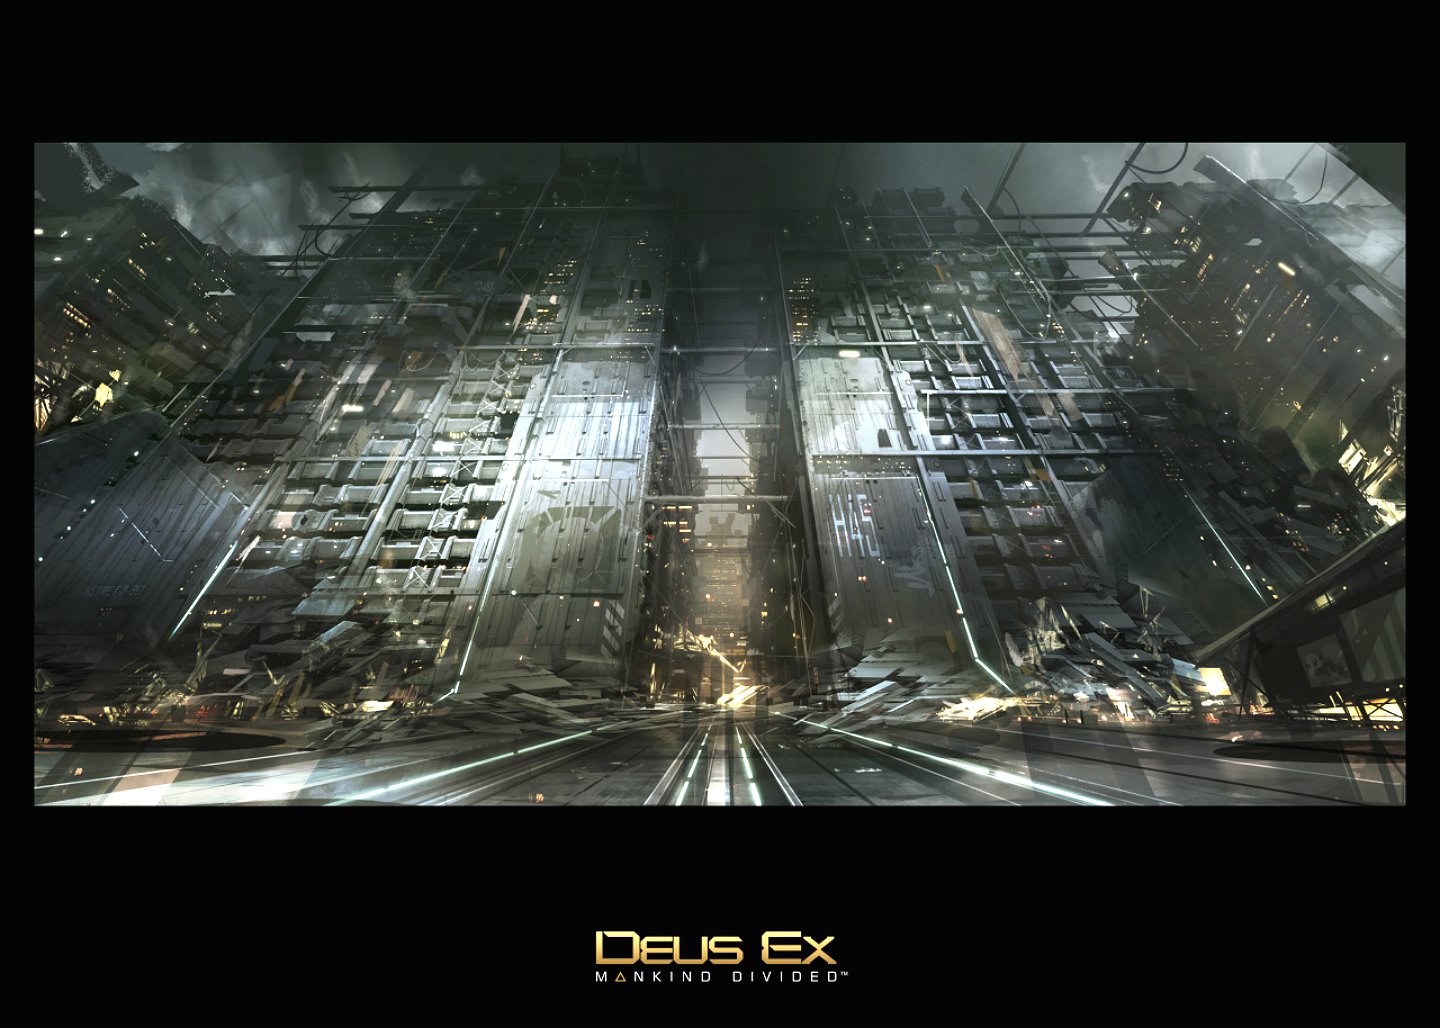 dues, Ex, Cyberpunk, Divided, Fps, Futuristic, Mankind, Rpg, Sci fi, Shooter, Stealth, Tactical, Warrior, Science, Fiction, Fighting, Cyber, Punk, Cyborg, Technics, Mankind, Divided, Human, Revolution, Crime, F Wallpaper